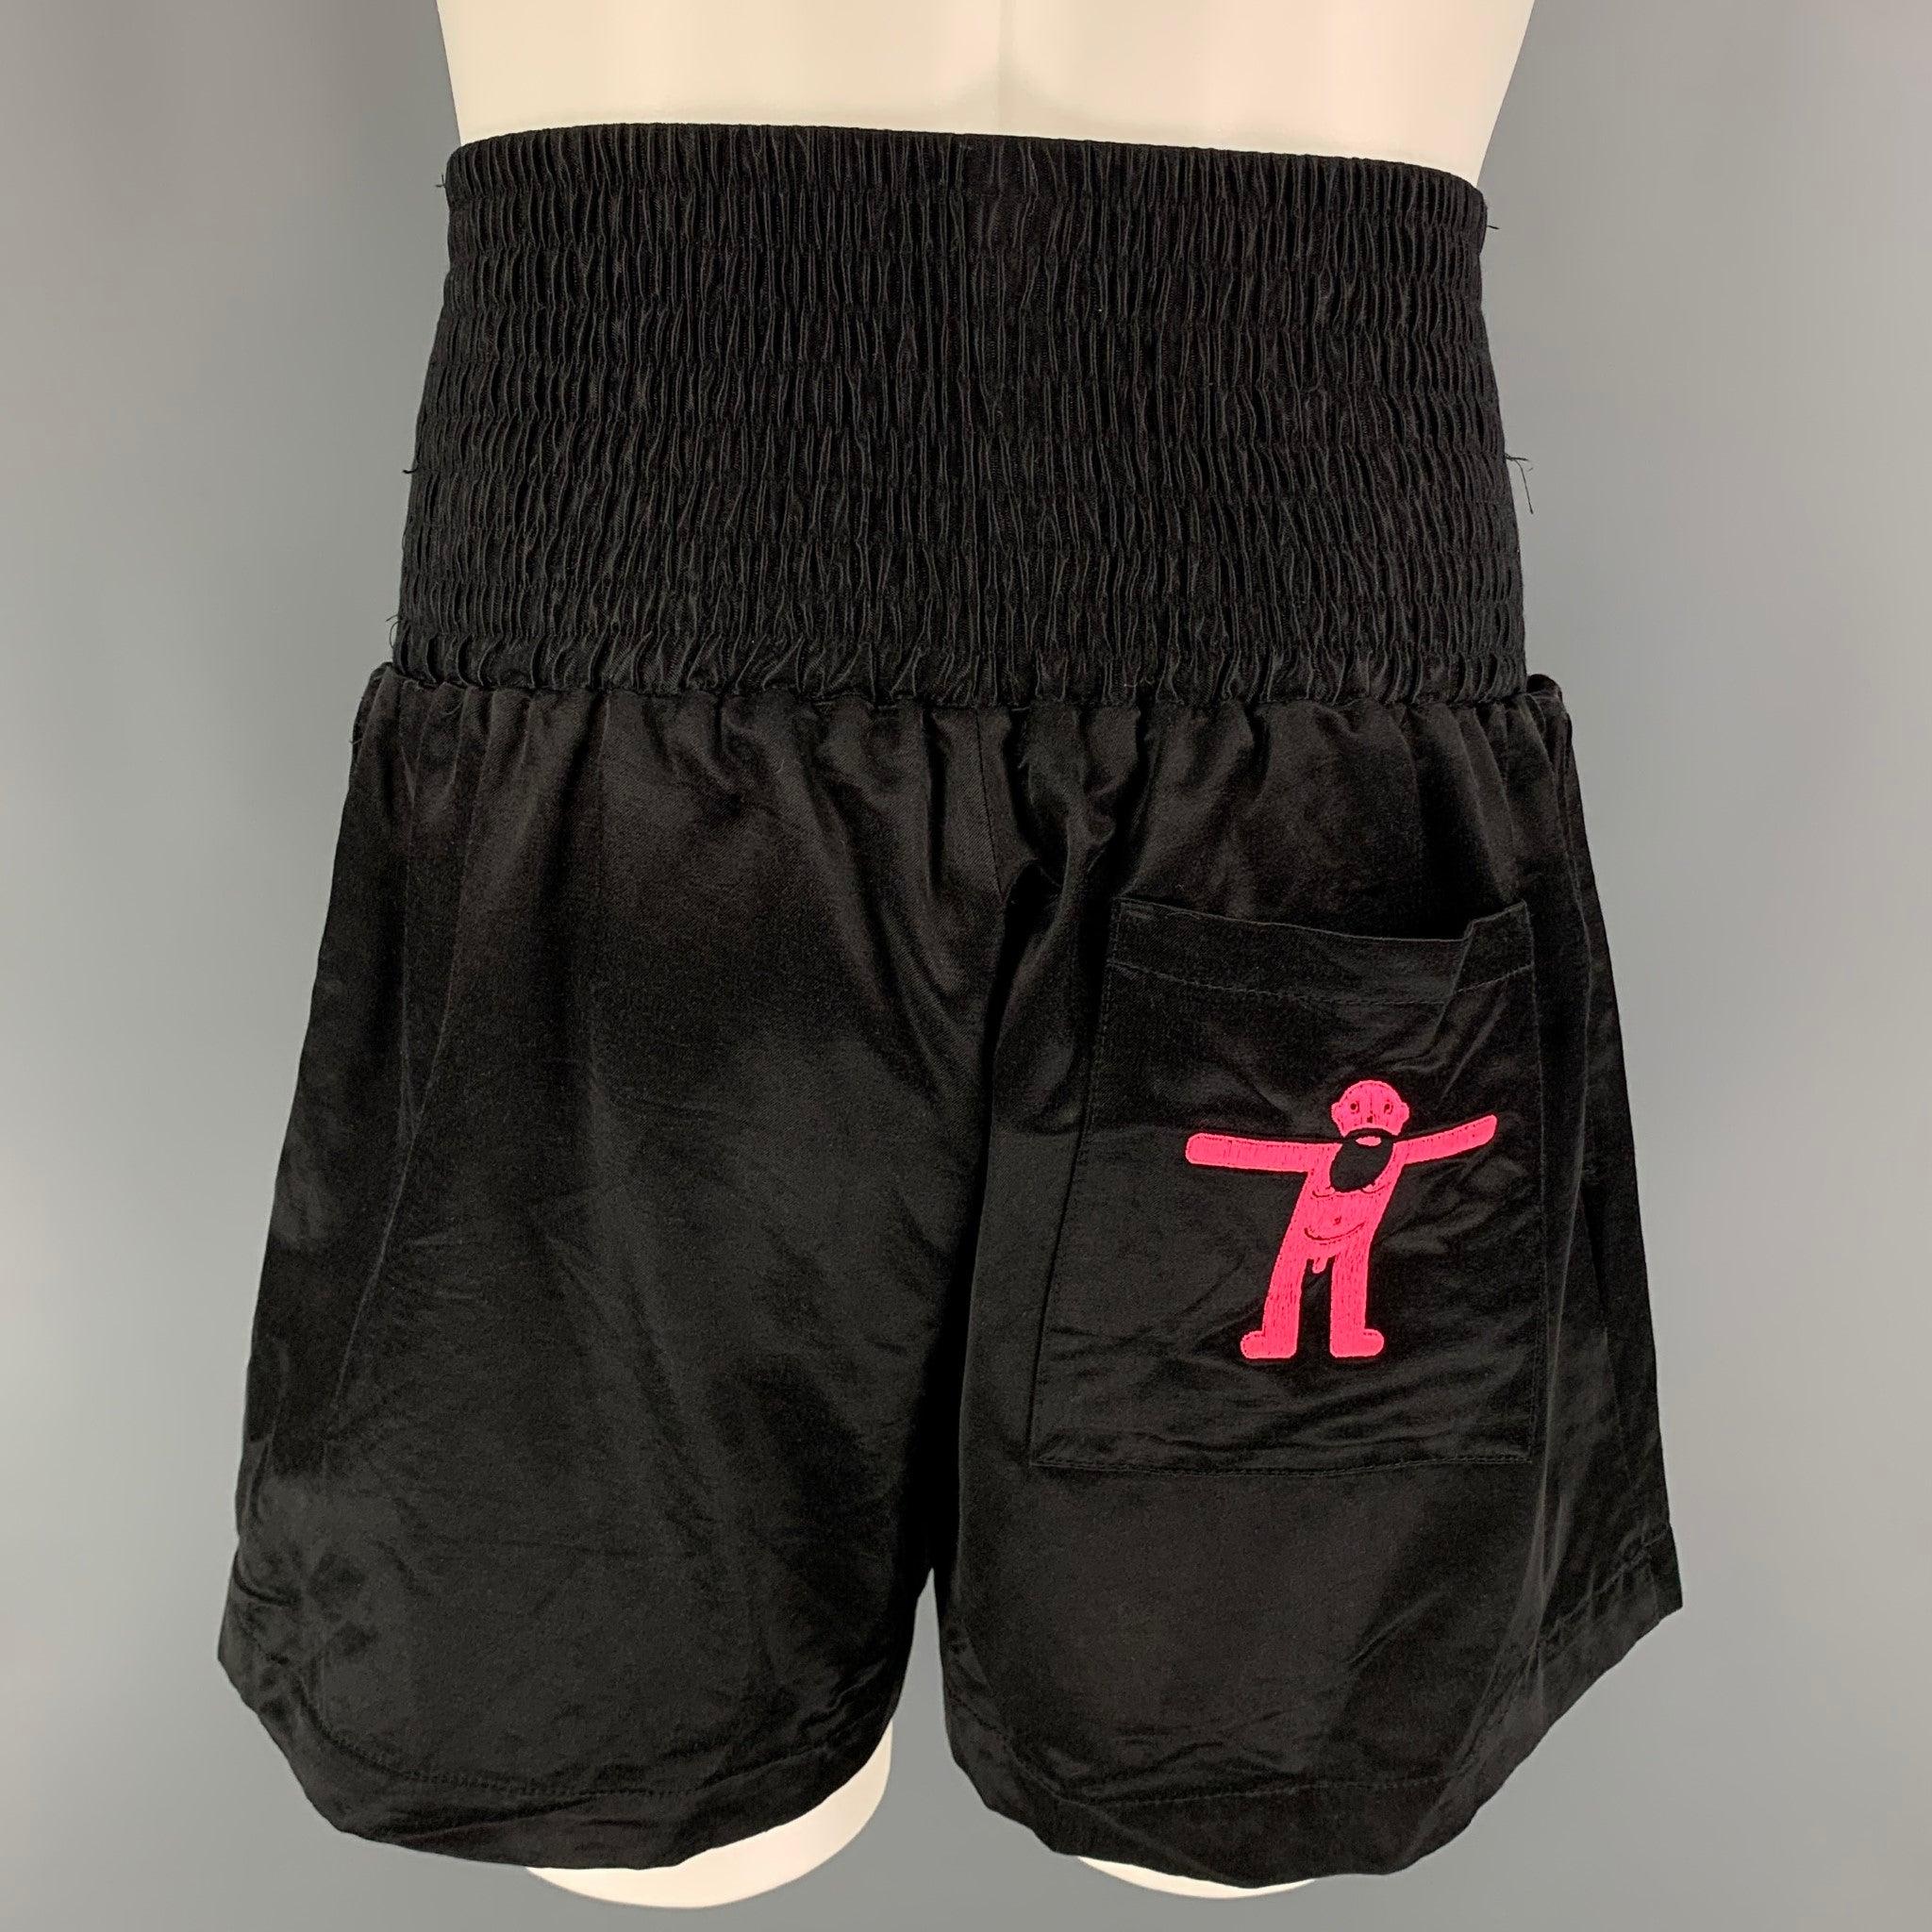 WALTER VAN BEIRENDONCK AW 19 boxer shorts comes in a black cotton featuring a high waisted corset design, back embroidered design, and slit pockets. Includes tags. Very Good Pre-Owned Condition.  

Marked:   S 

Measurements: 
  Waist: 30 inches